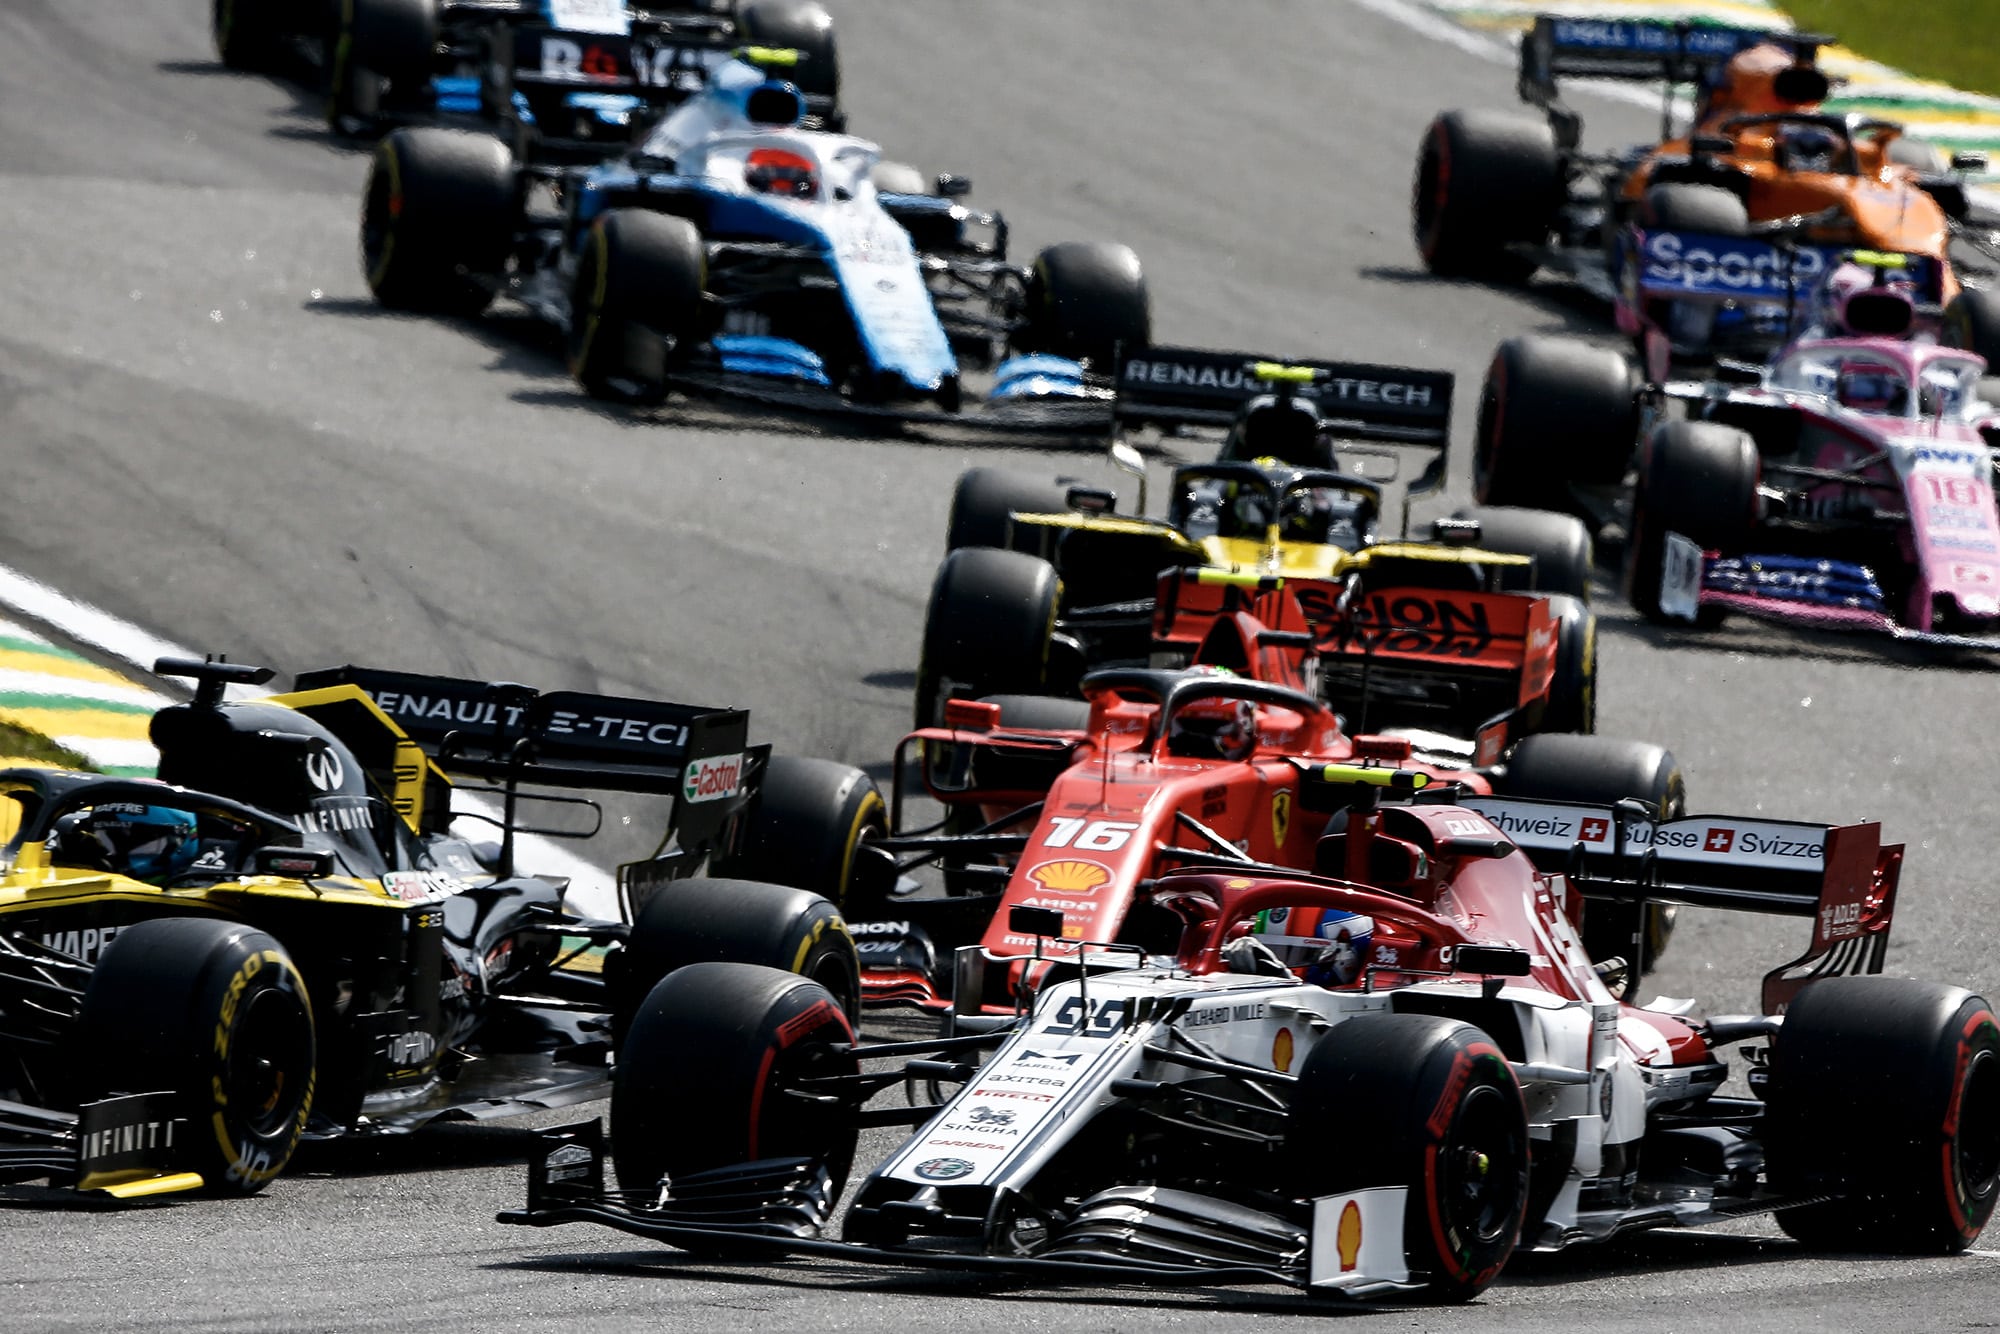 Charles Leclerc in the start melee at the 2019 F1 Brazilian Grand Prix